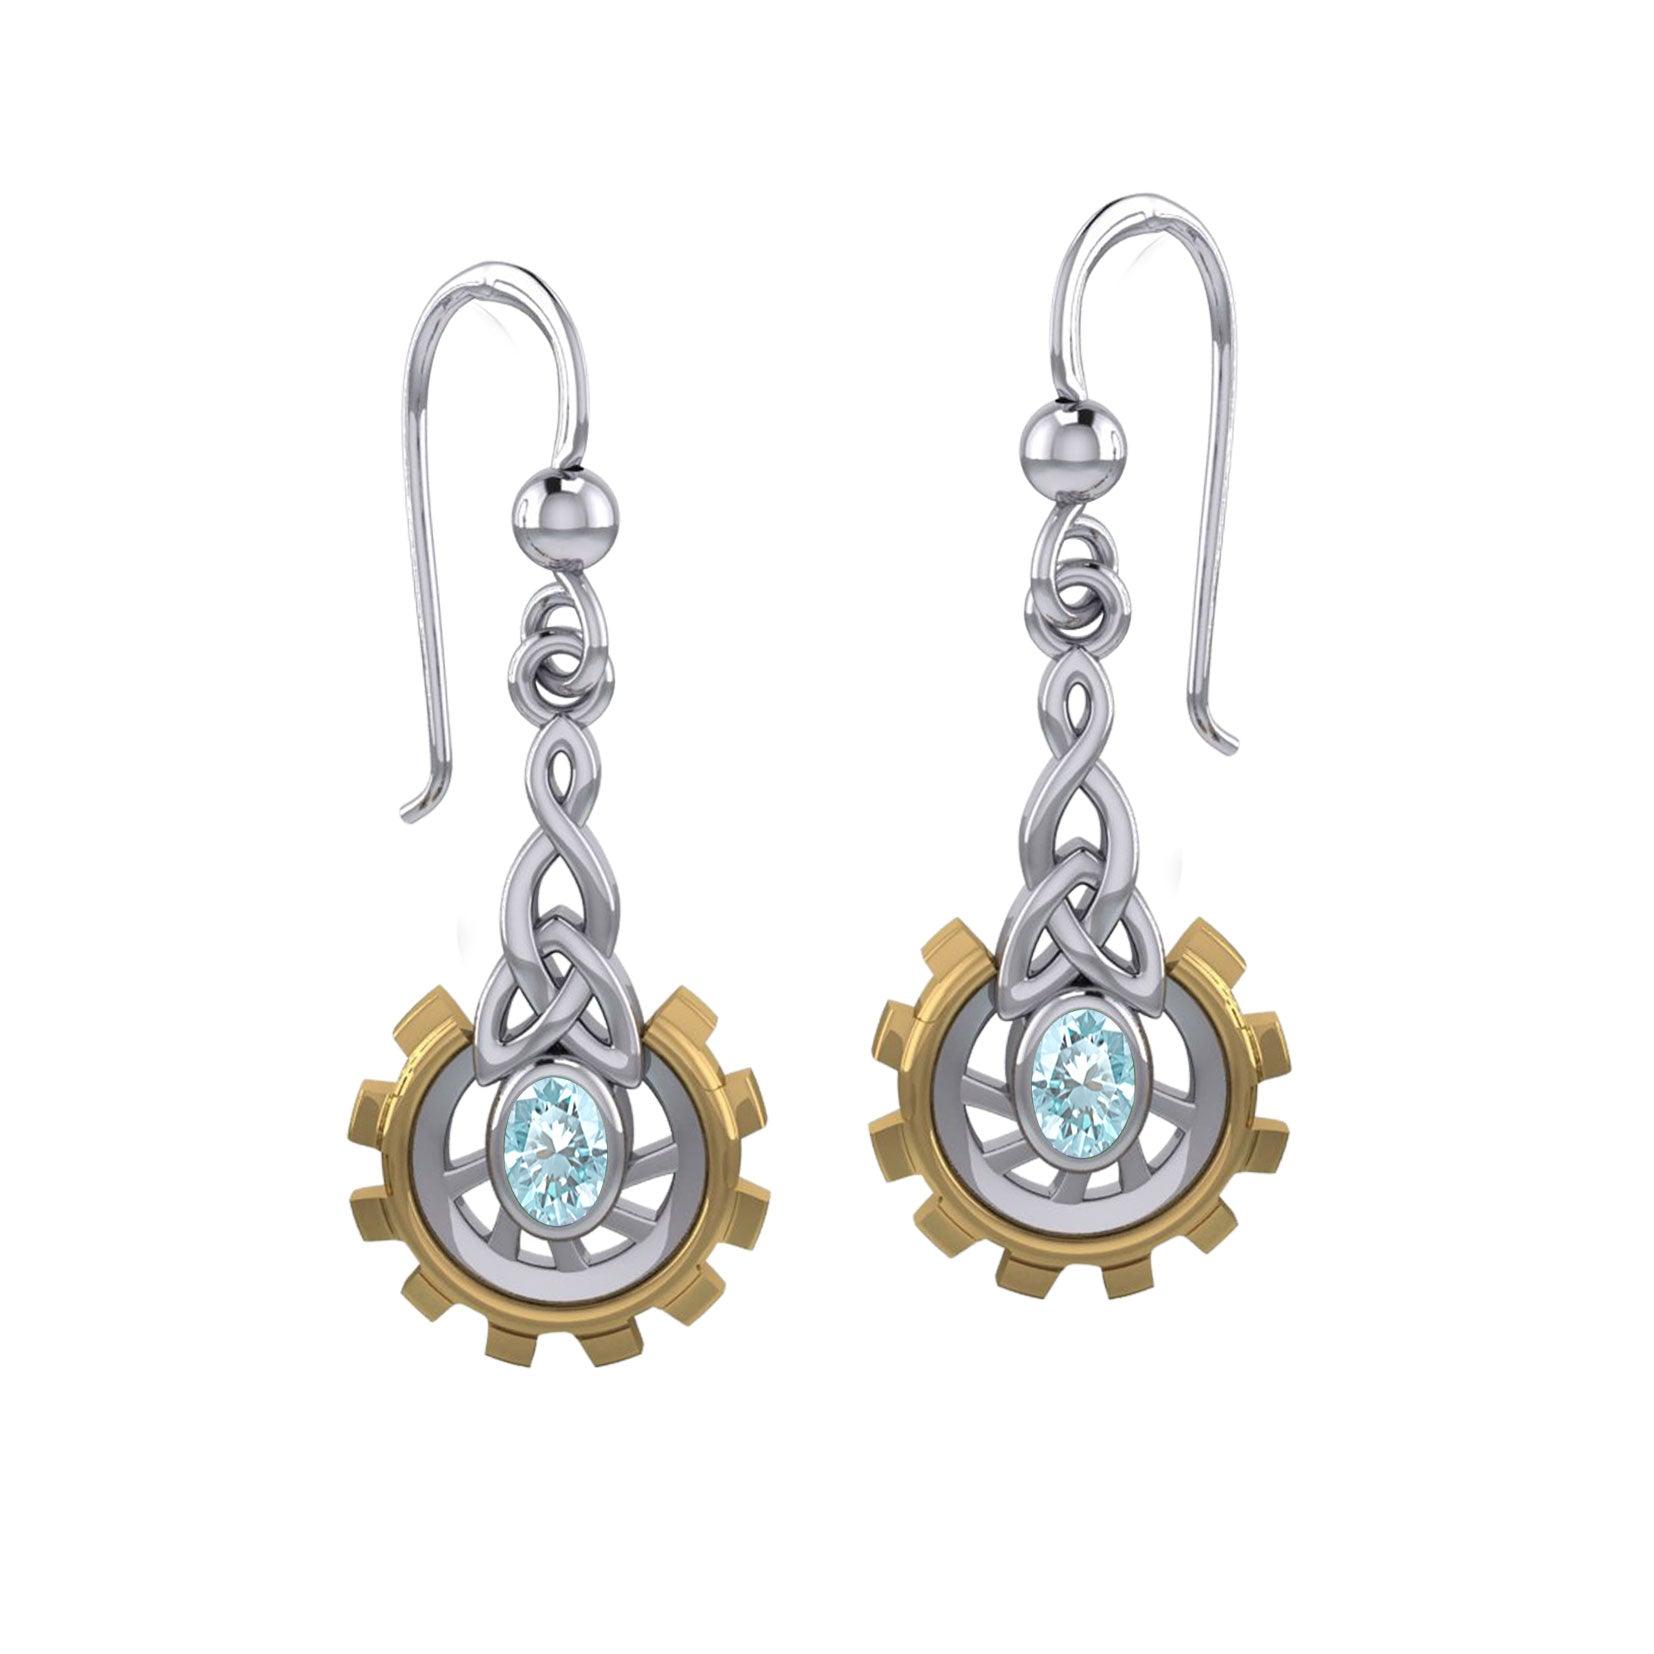 Steampunk Celtic Silver and Gold Accent Earrings with Oval Gemstone MER2117 - peterstone.dropshipping